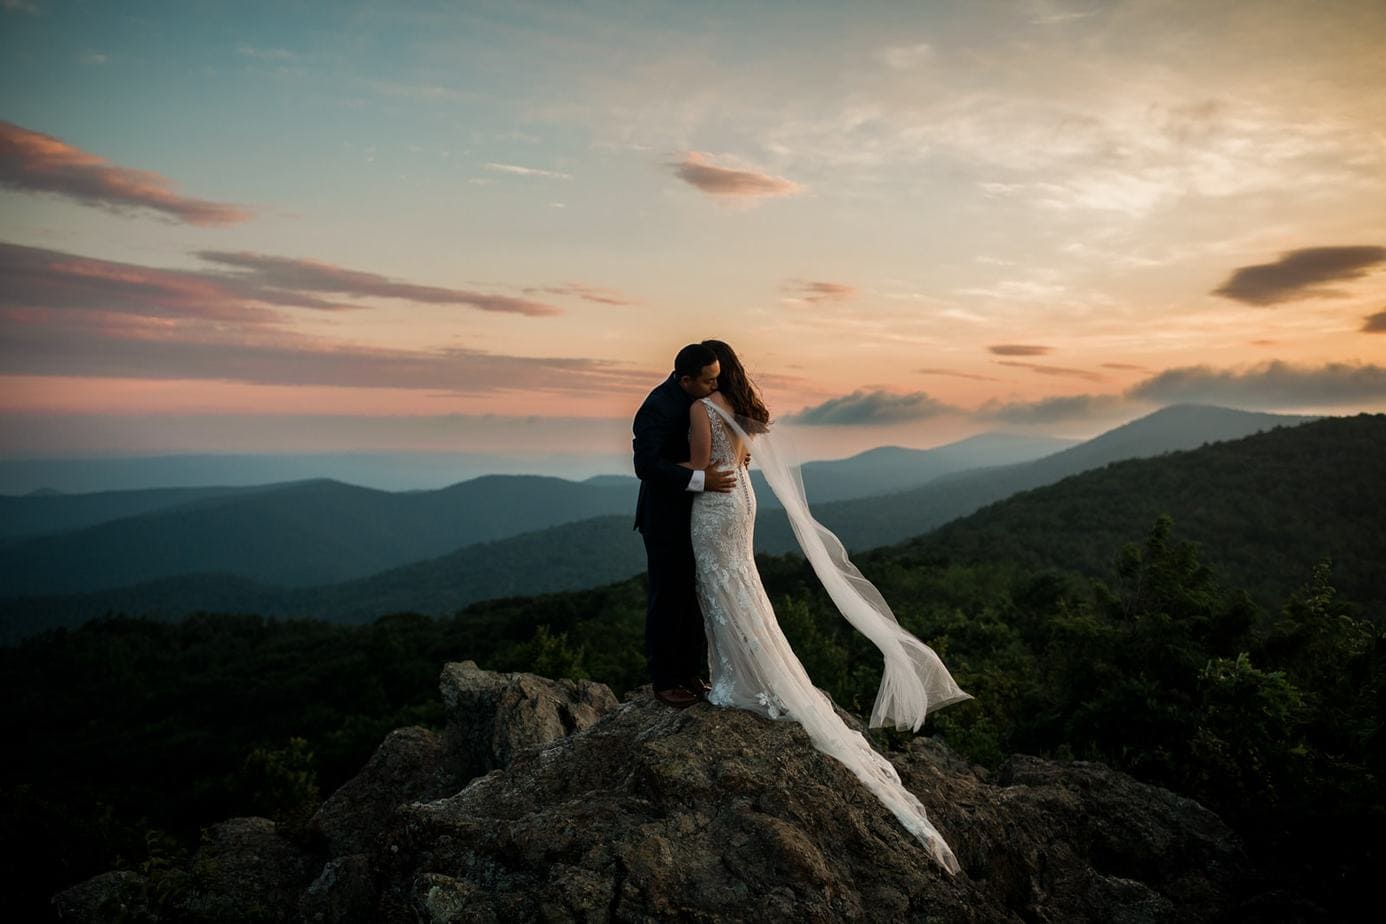 A couple stands on top of a mountain in Shenandoah National Park. The wind is blowing the bride's veil